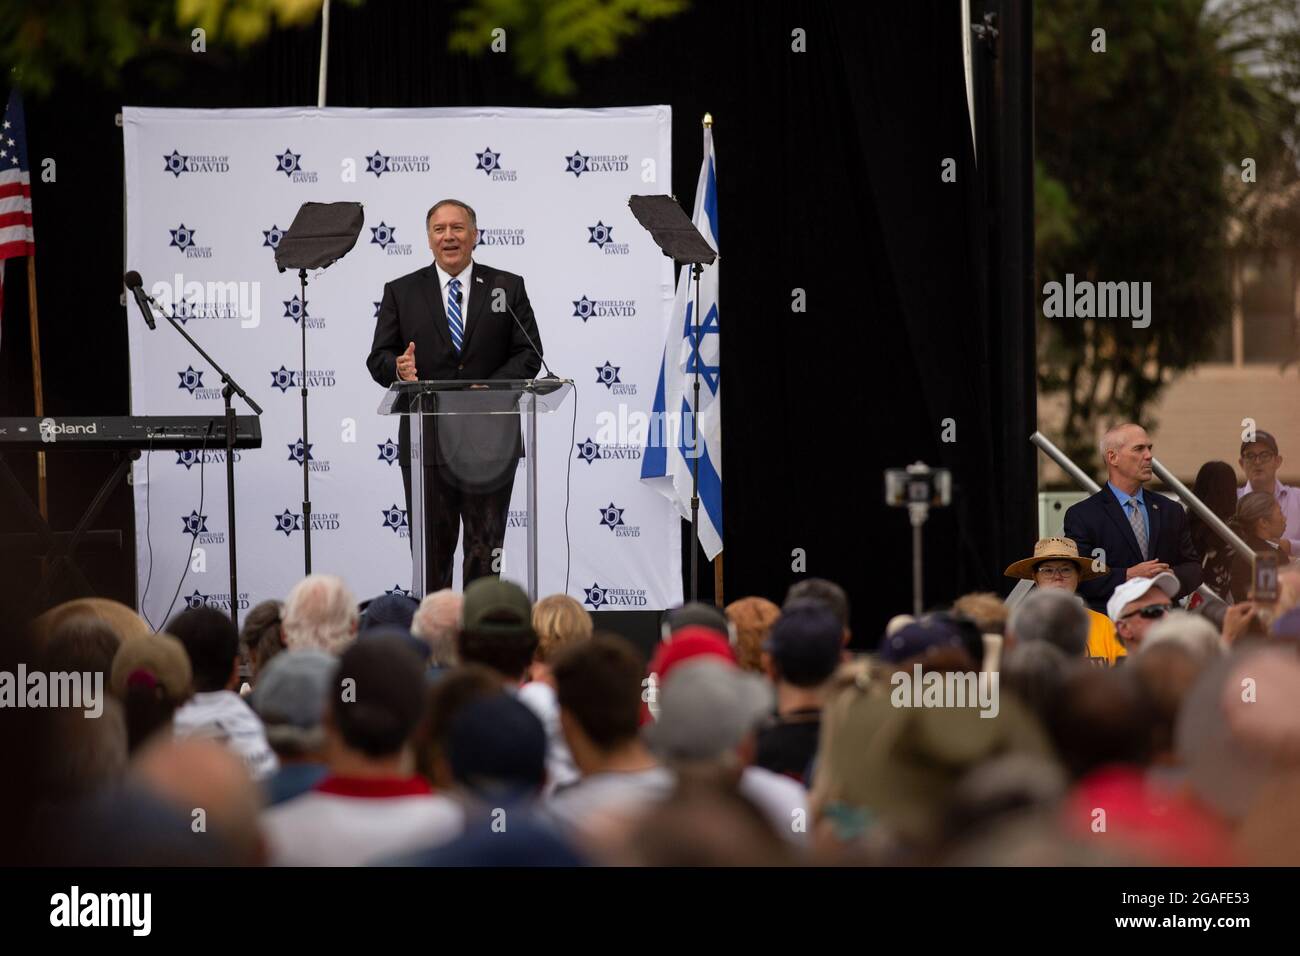 USA. 25th July, 2021. Former Secretary of State Mike Pompeo speaks during the “We Are Israel” rally in El Cajon, CA on Sunday, July 25, 2021. Pompeo was the keynote speaker at the rally, which according to non-profit Shield of David, was created to “rally with Jews and Christians who boldly reject anti-Semitism and support Judeo-Christian values.” (Photo by Kristian Carreon/Sipa USA) Credit: Sipa USA/Alamy Live News Stock Photo